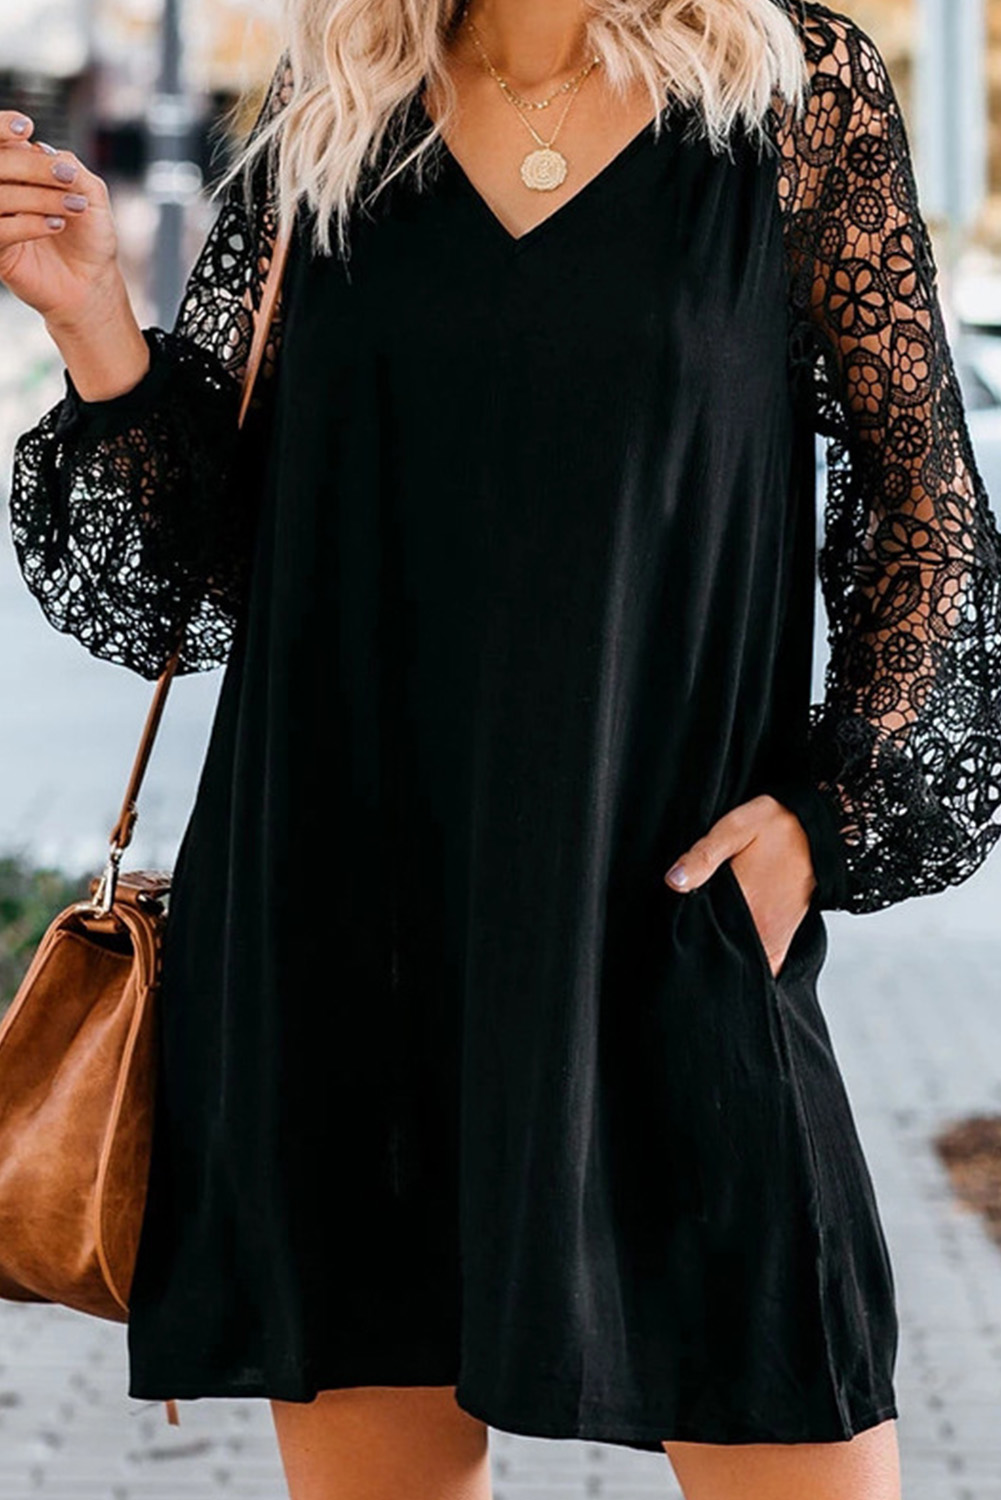 Black Lace Long Sleeves Shift Above Knee Dress - (US 8-10)M